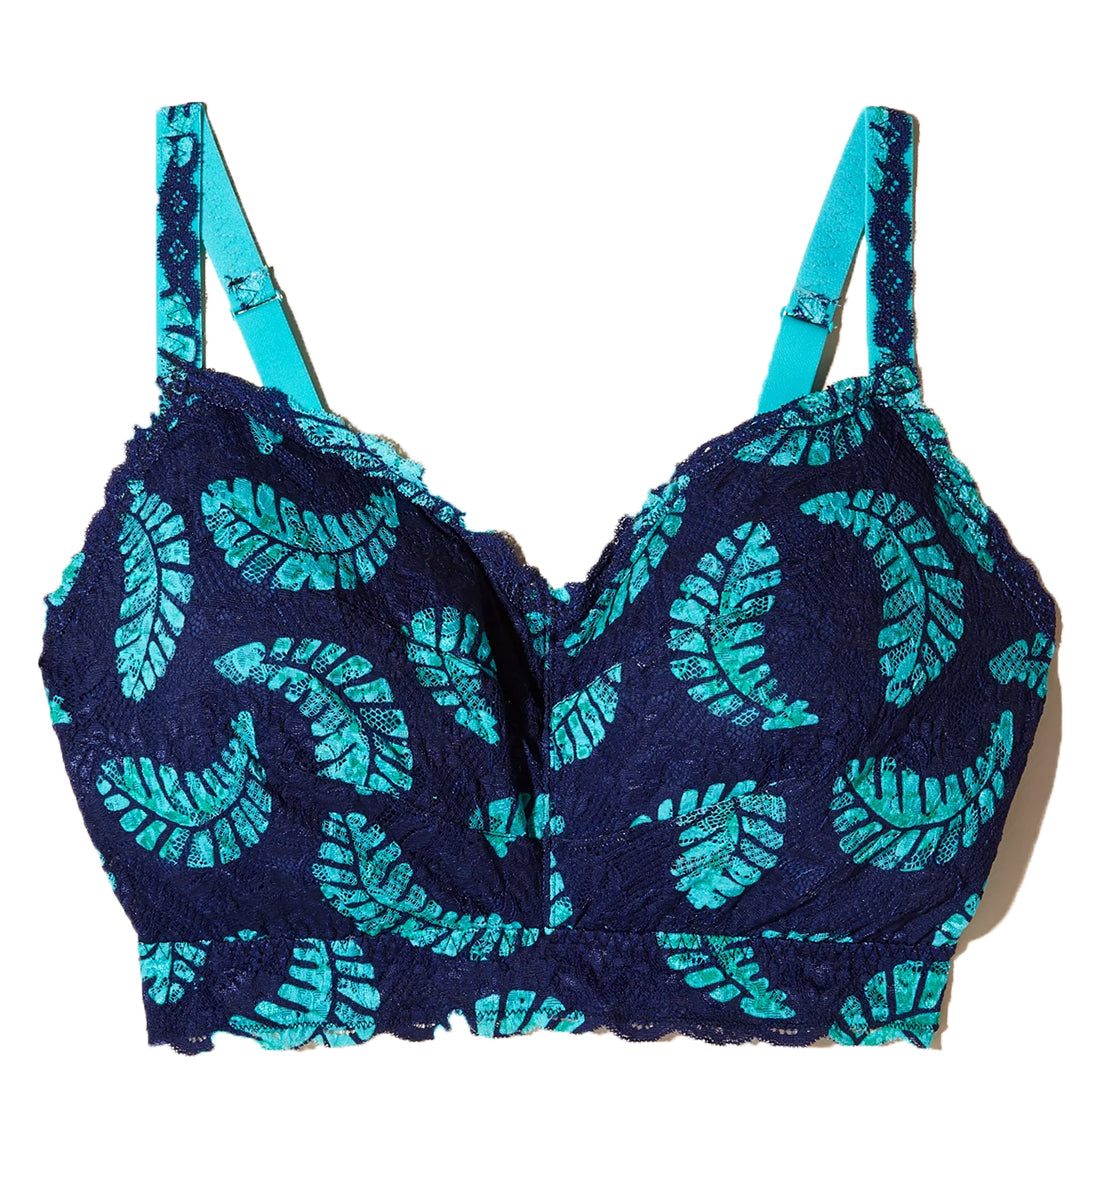 Cosabella Never Say Never Printed SUPER CURVY Sweetie Bralette (NEVEP1322),XS,Leaf - Leaf,XS